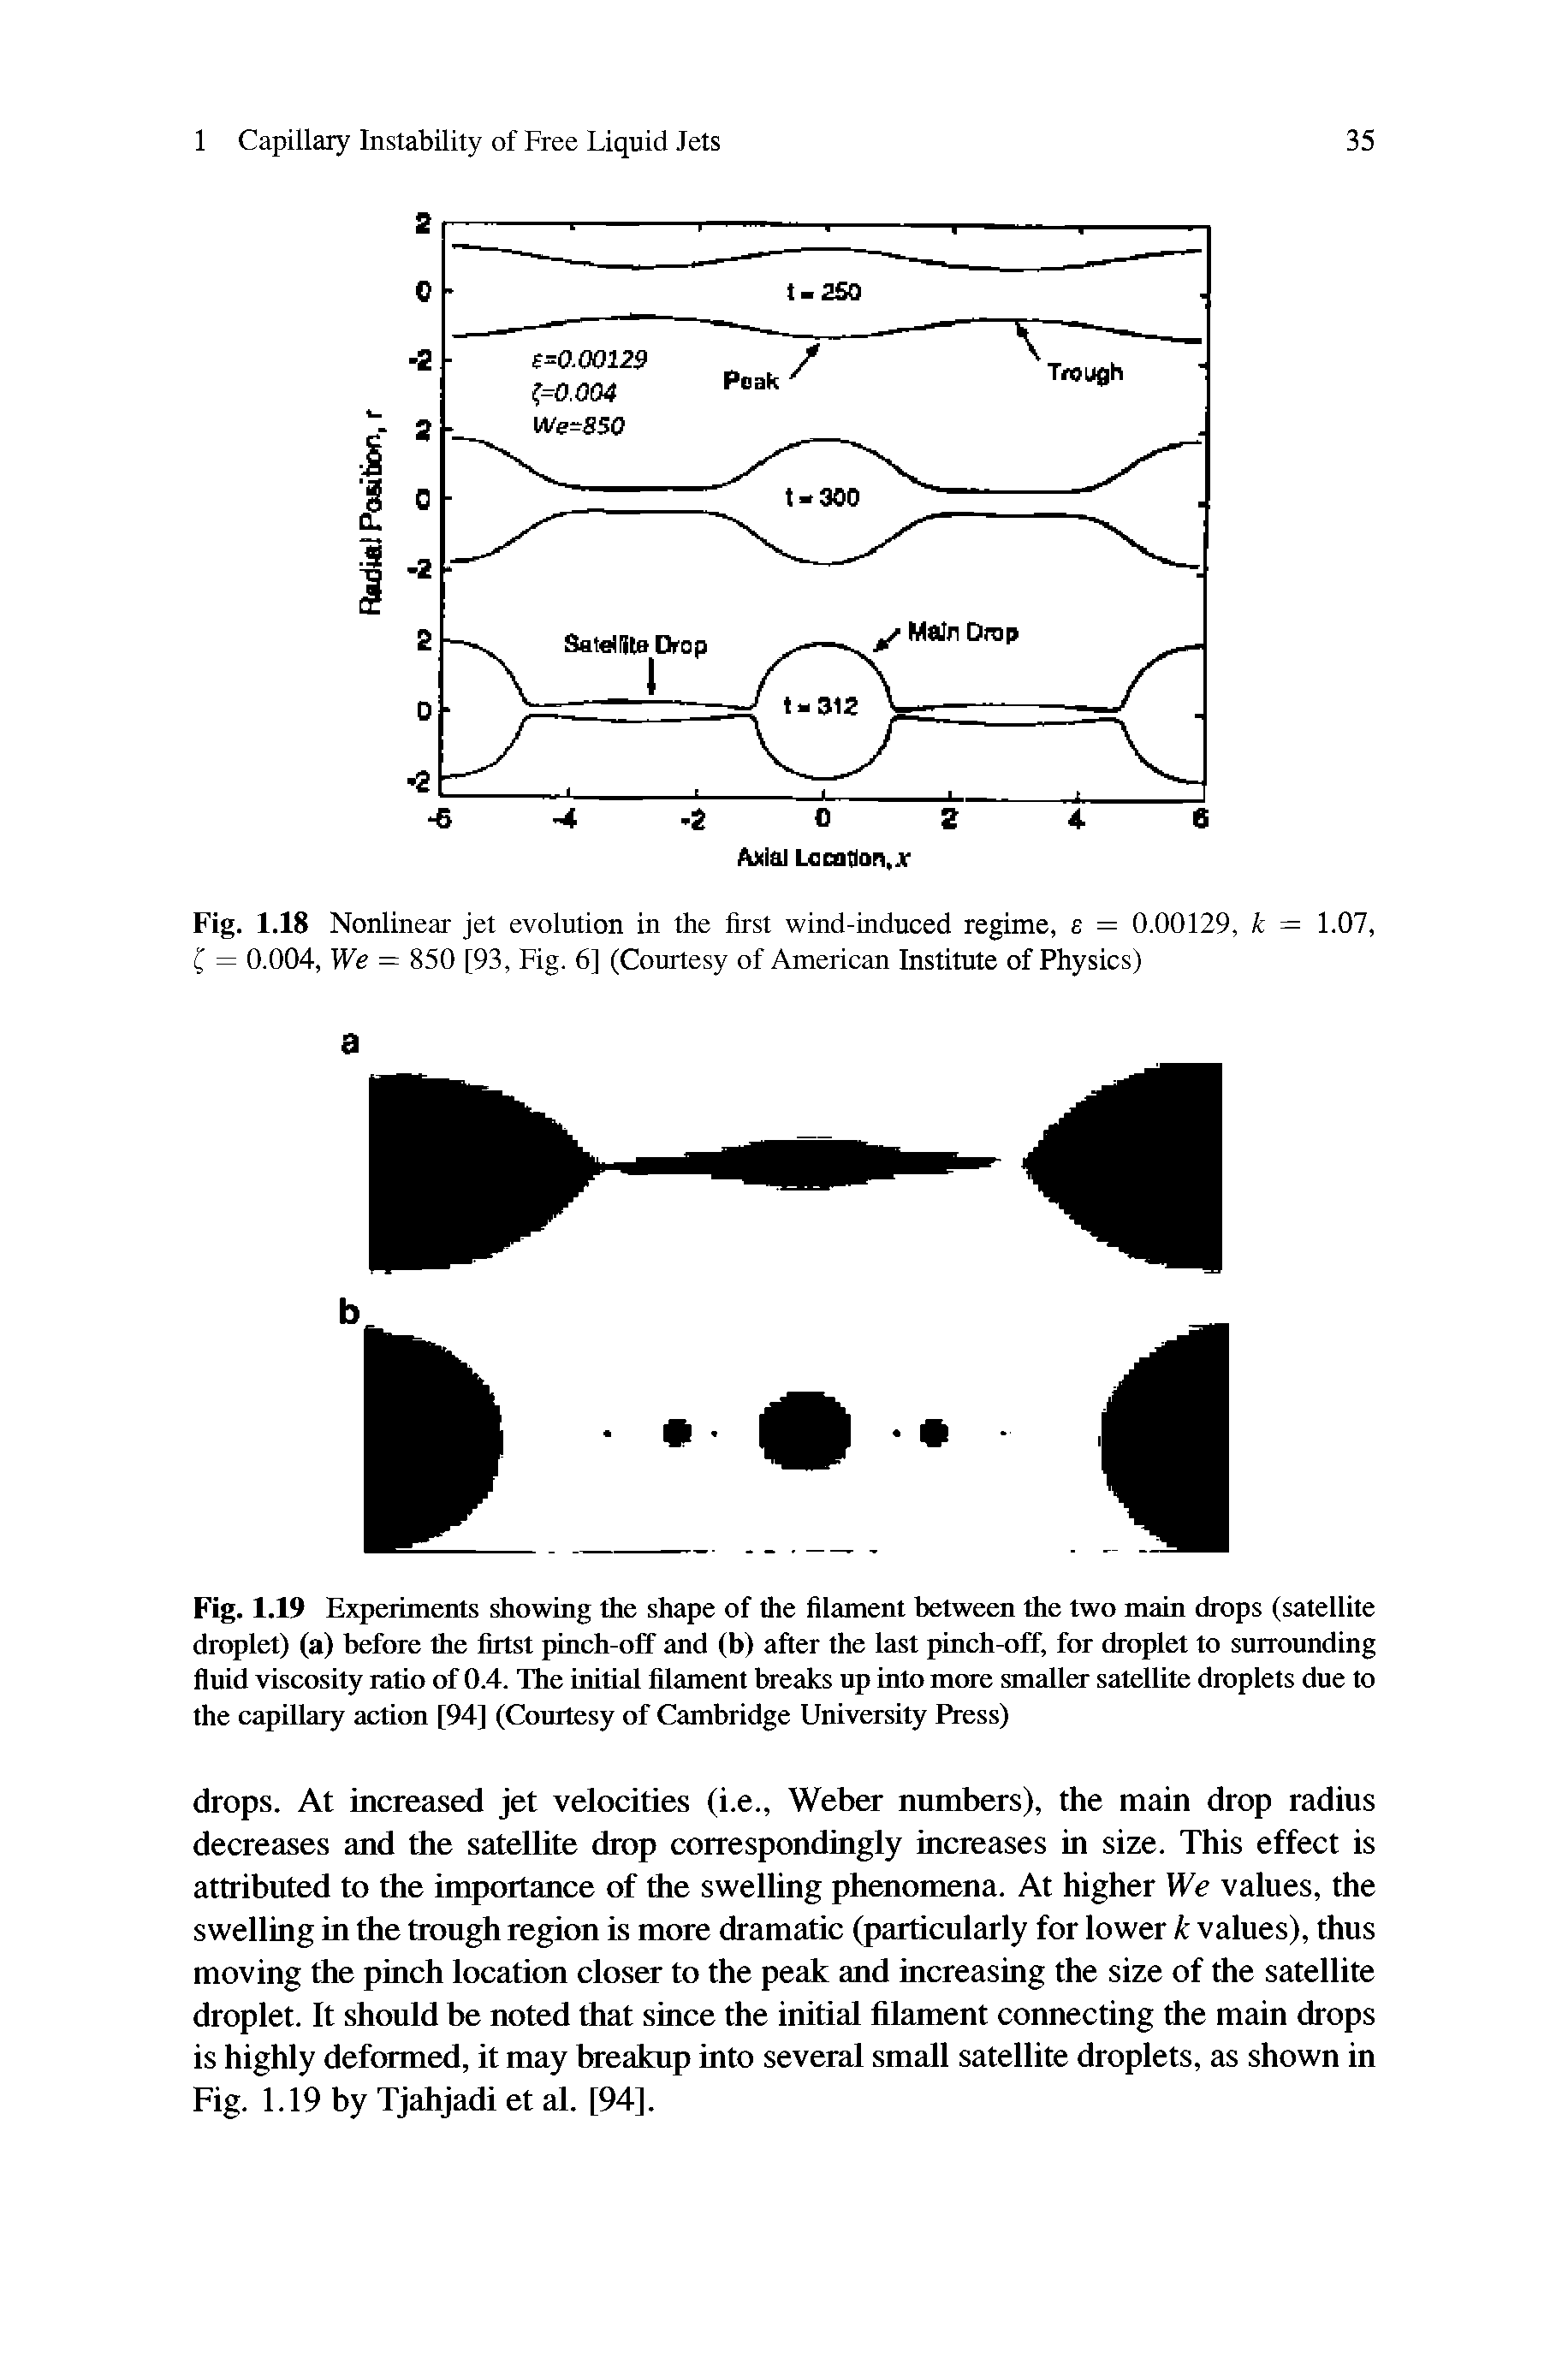 Fig. 1.19 Experiments showing the shape of the filament between the two main drops (satellite droplet) (a) before the firtst pinch-off and (b) after the last pinch-off, for droplet to surrounding fluid viscosity ratio of 0.4. The initial filament breaks up into rntwe smaller satellite droplets due to the capillary action [94] (Courtesy of Cambridge University Press)...